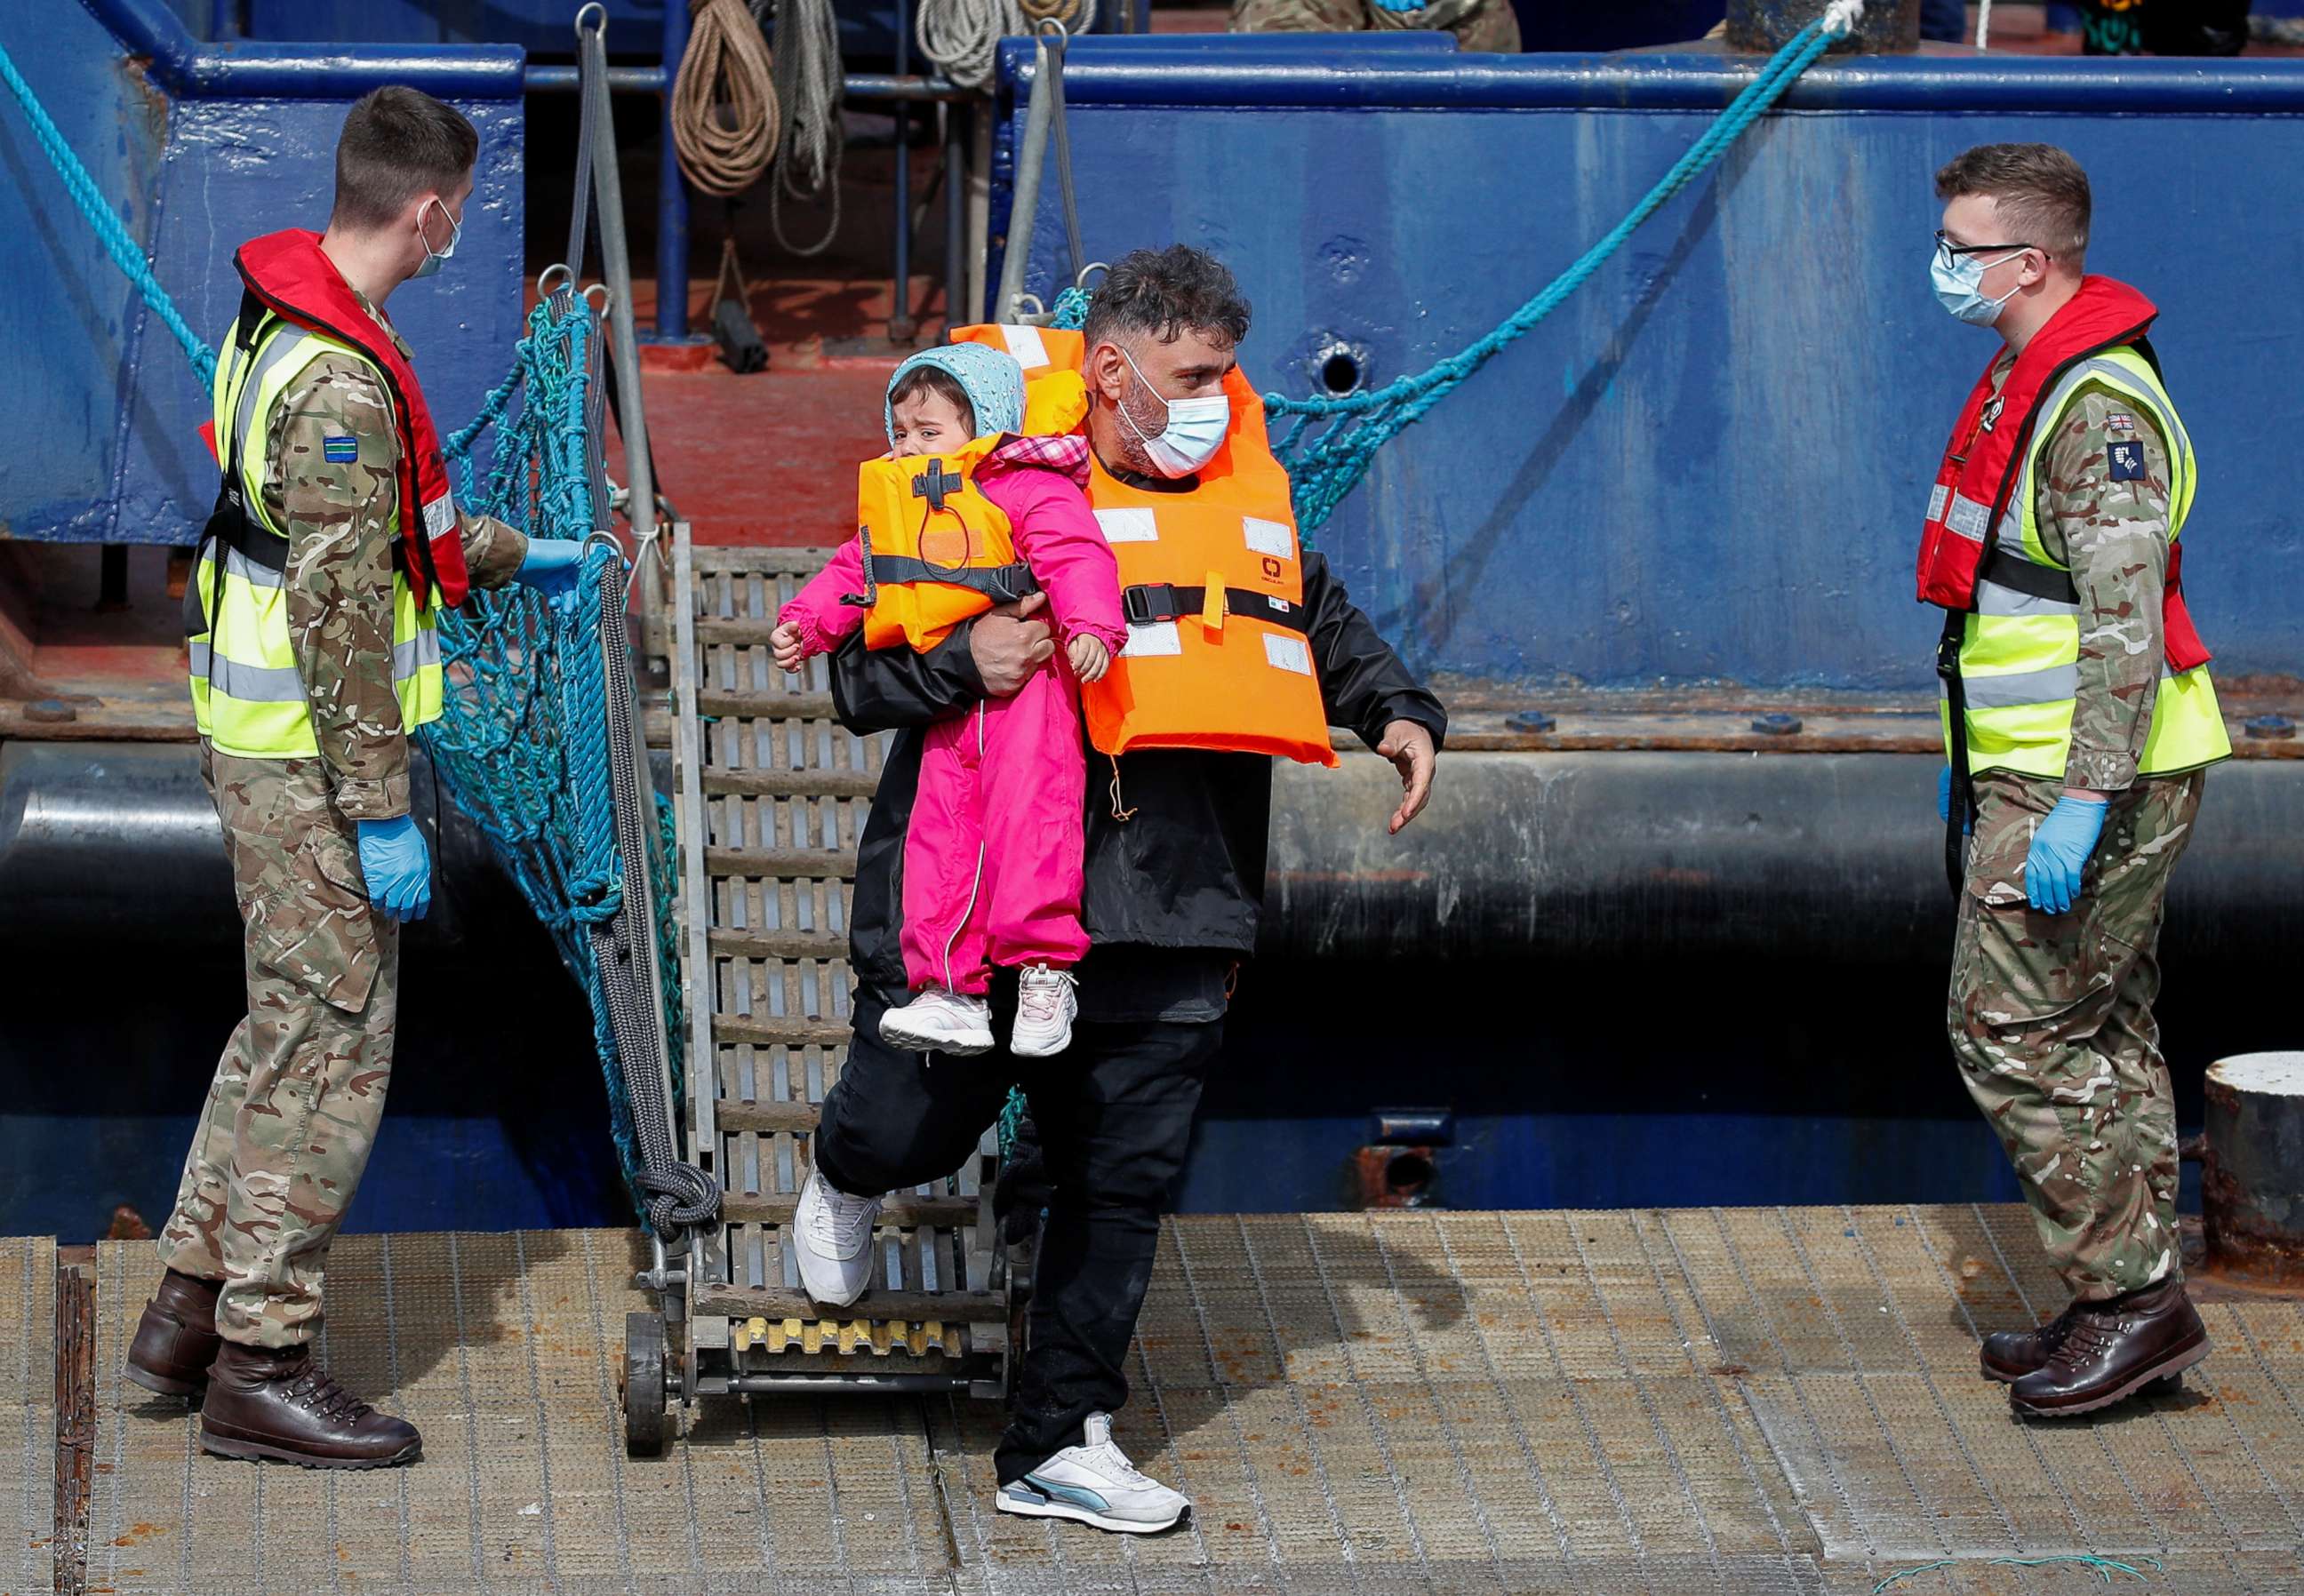 PHOTO: A migrant with a child walks past members of the British military as he arrives at the Port of Dover after being rescued while crossing the English Channel, in Dover, Britain, April 14, 2022.